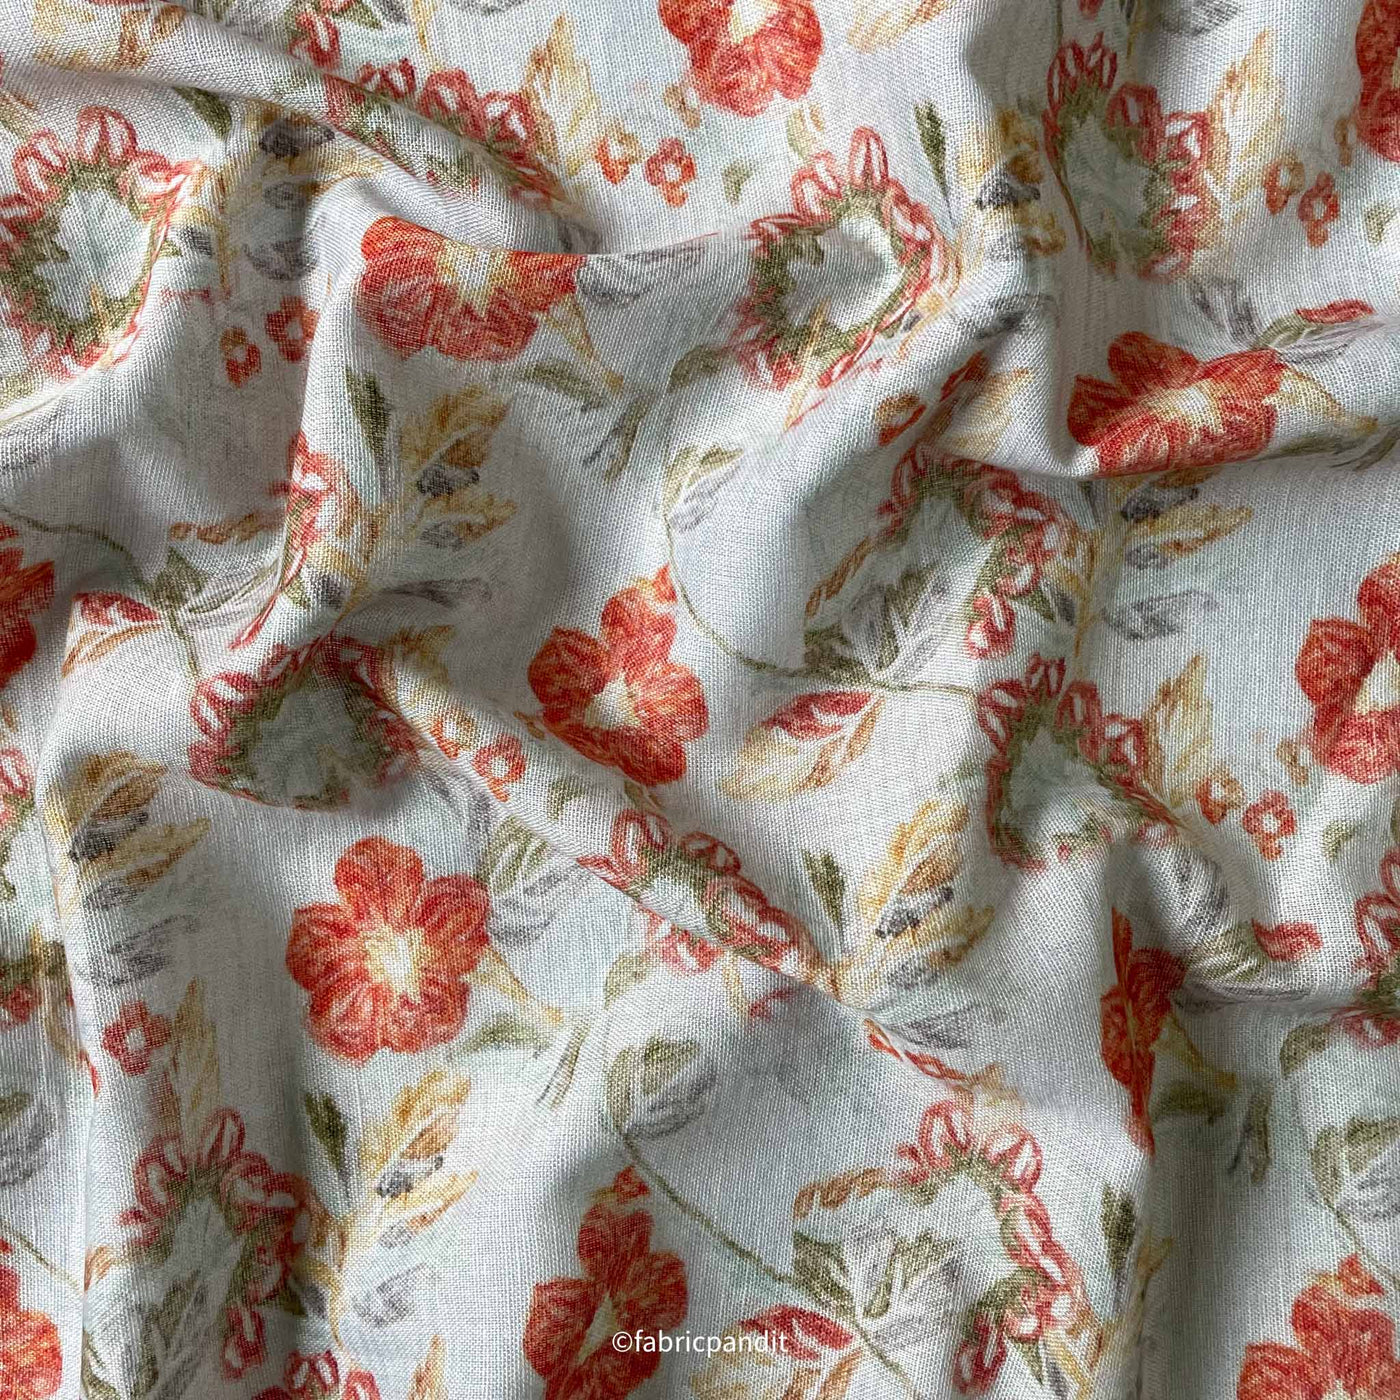 Fabric Pandit Fabric Light Grey & Peach Garden of Daisies Digital Printed Pure Cotton Linen Fabric (Width 58 Inches)